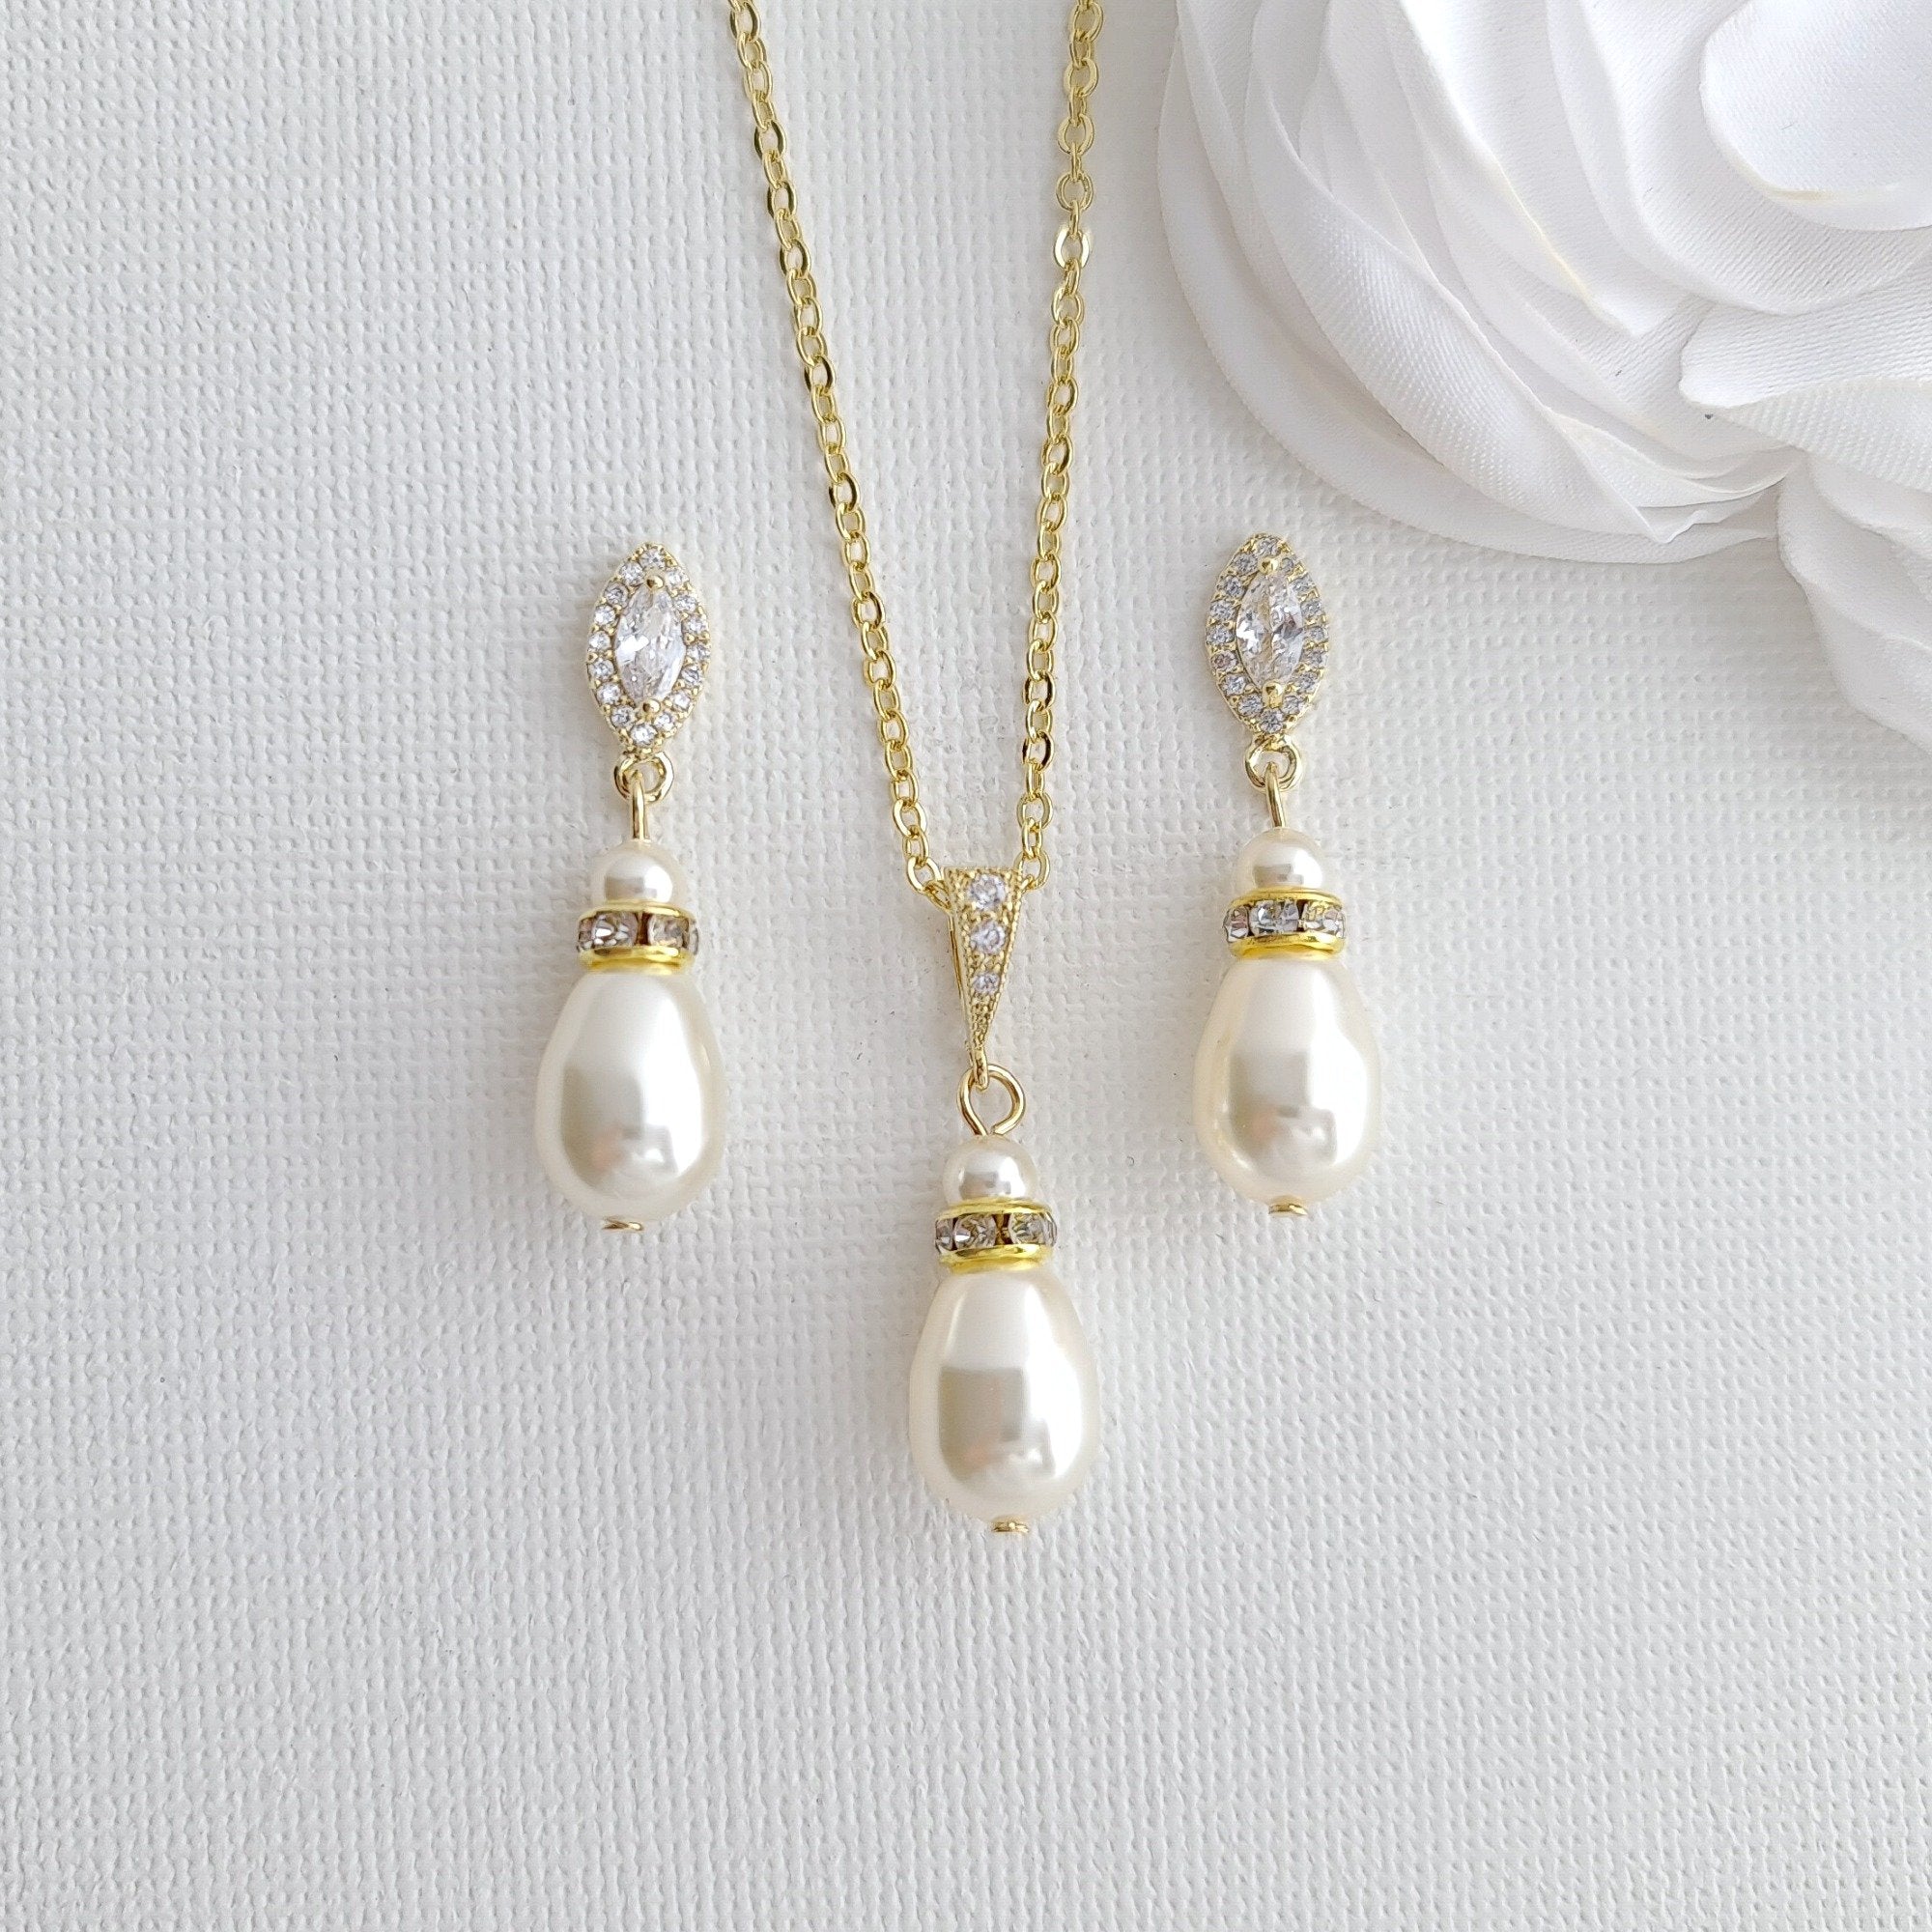 Pearl Jewelry Set with Teardrop Pearl Pendant and Earrings for Brides- Ella